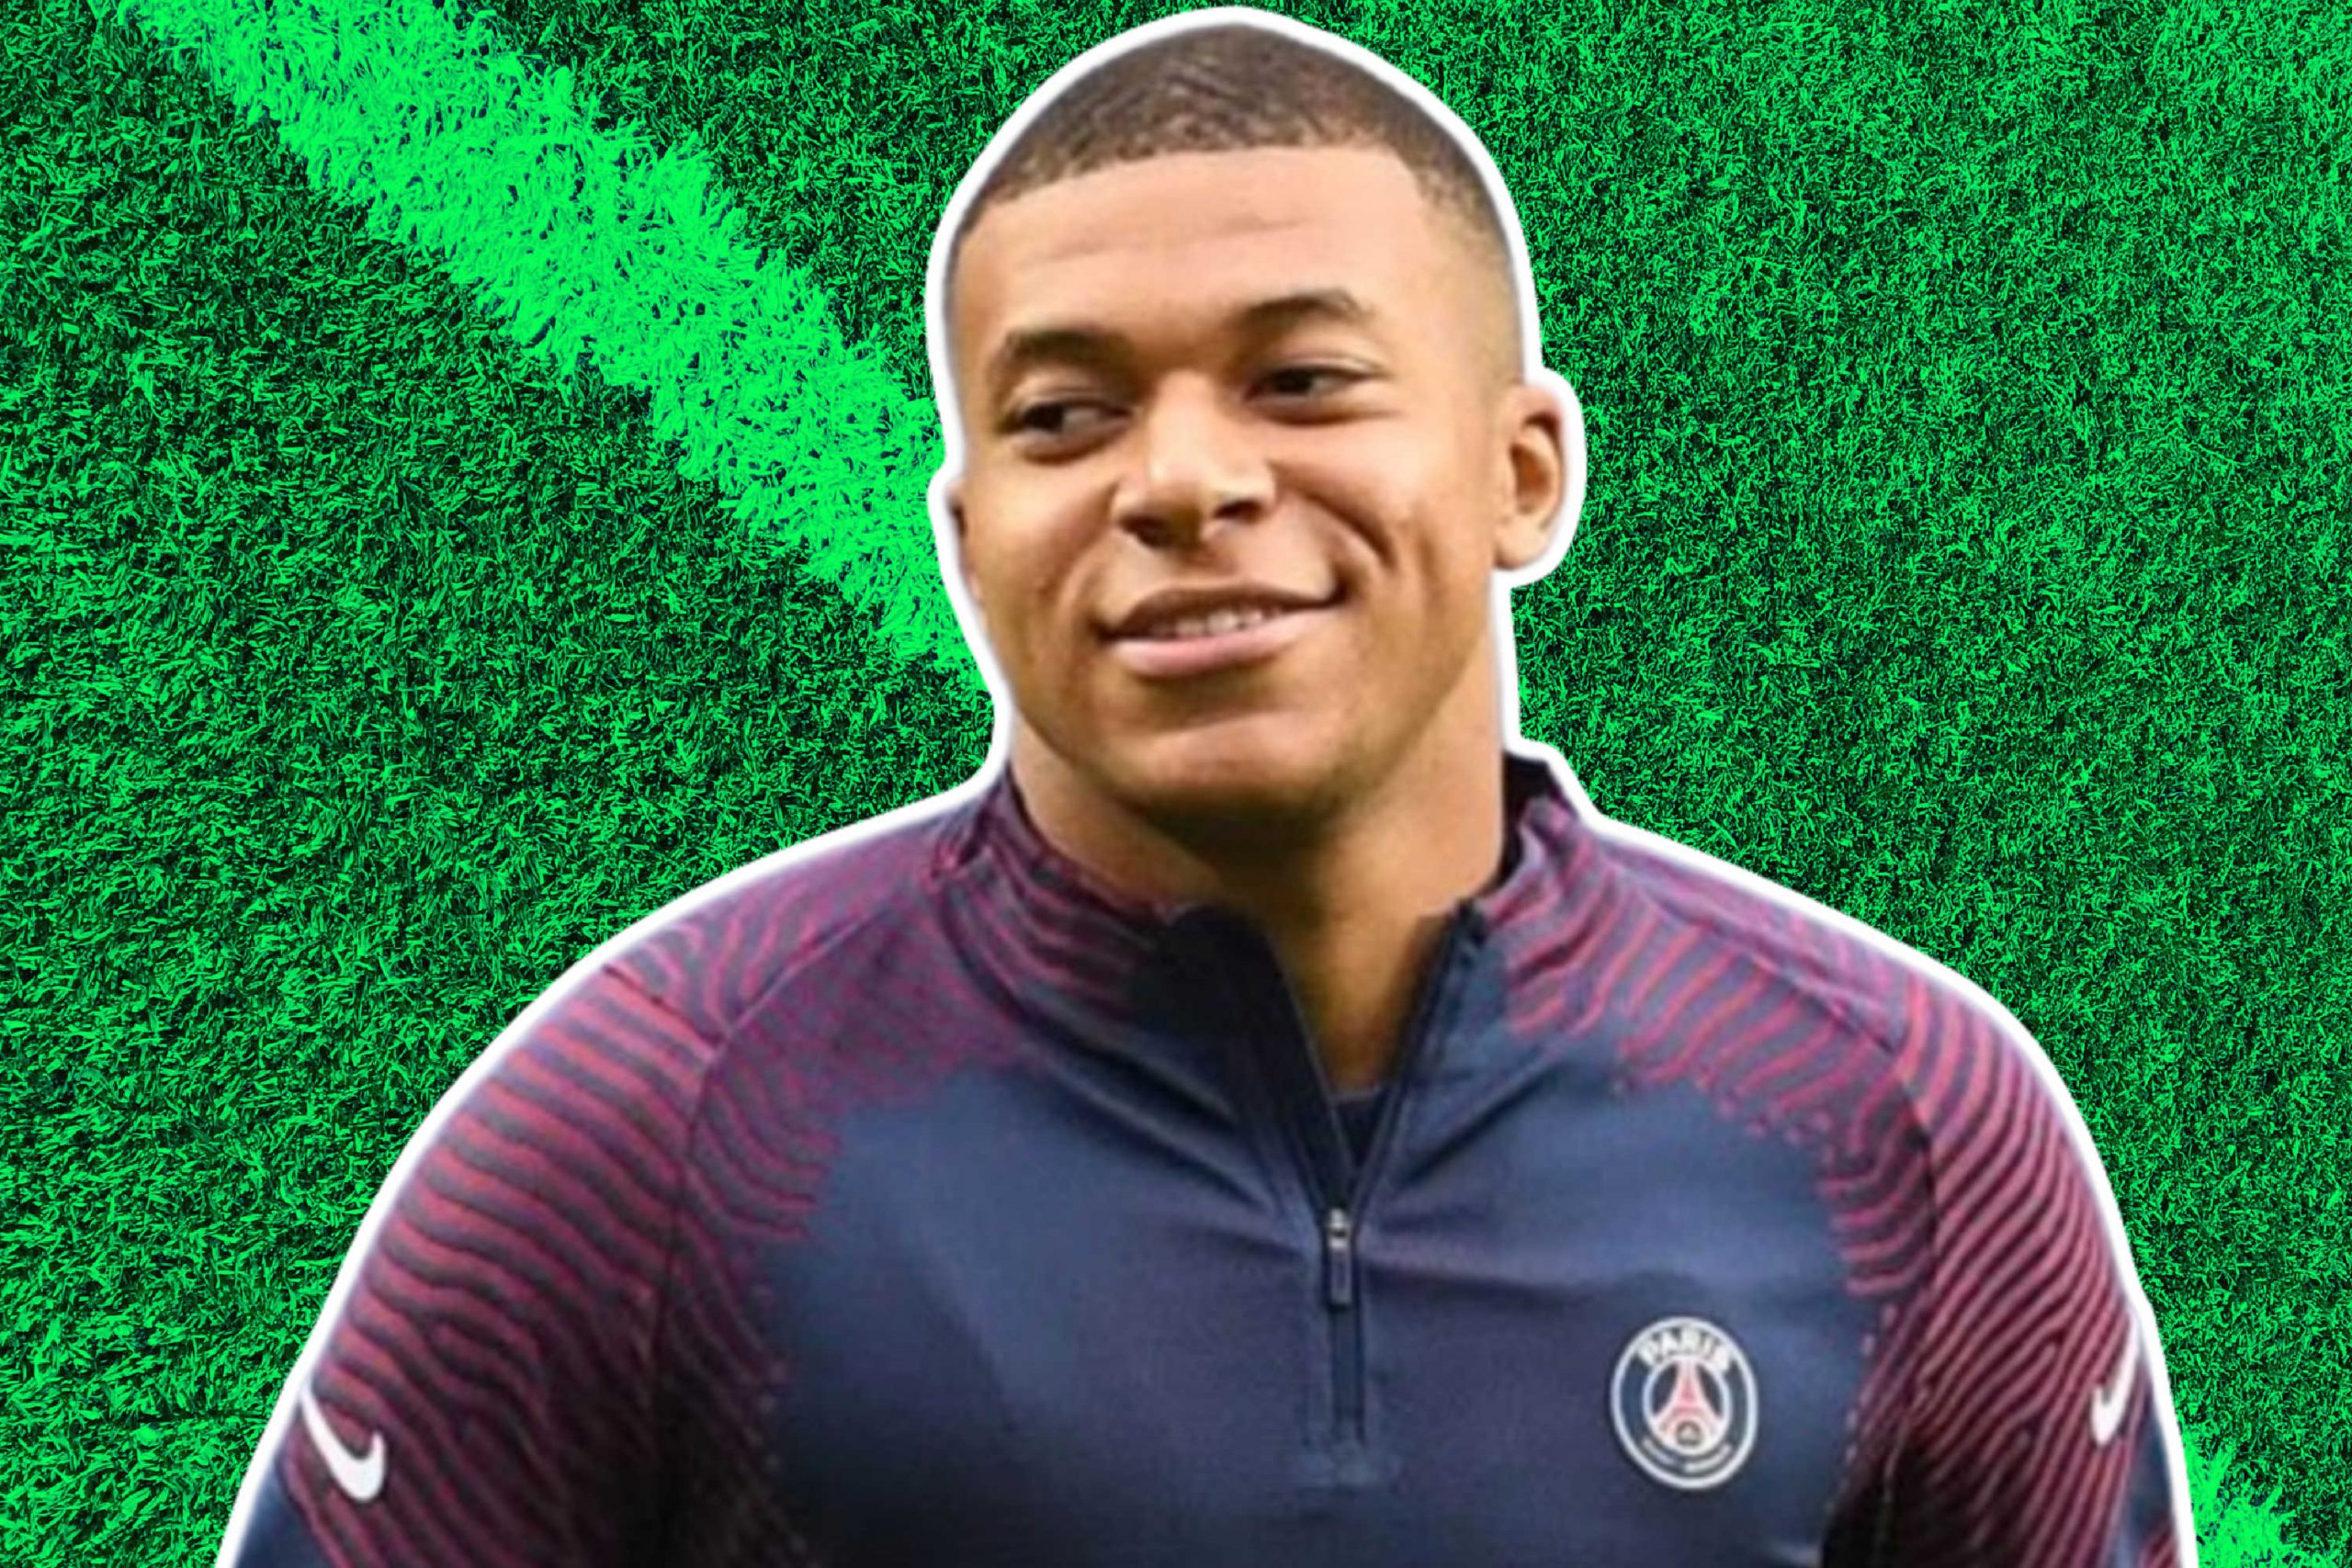 What is a ‘farmers league’ – the derogatory term that prompted Kylian Mbappe’s  tweet after Lyon beat Man City